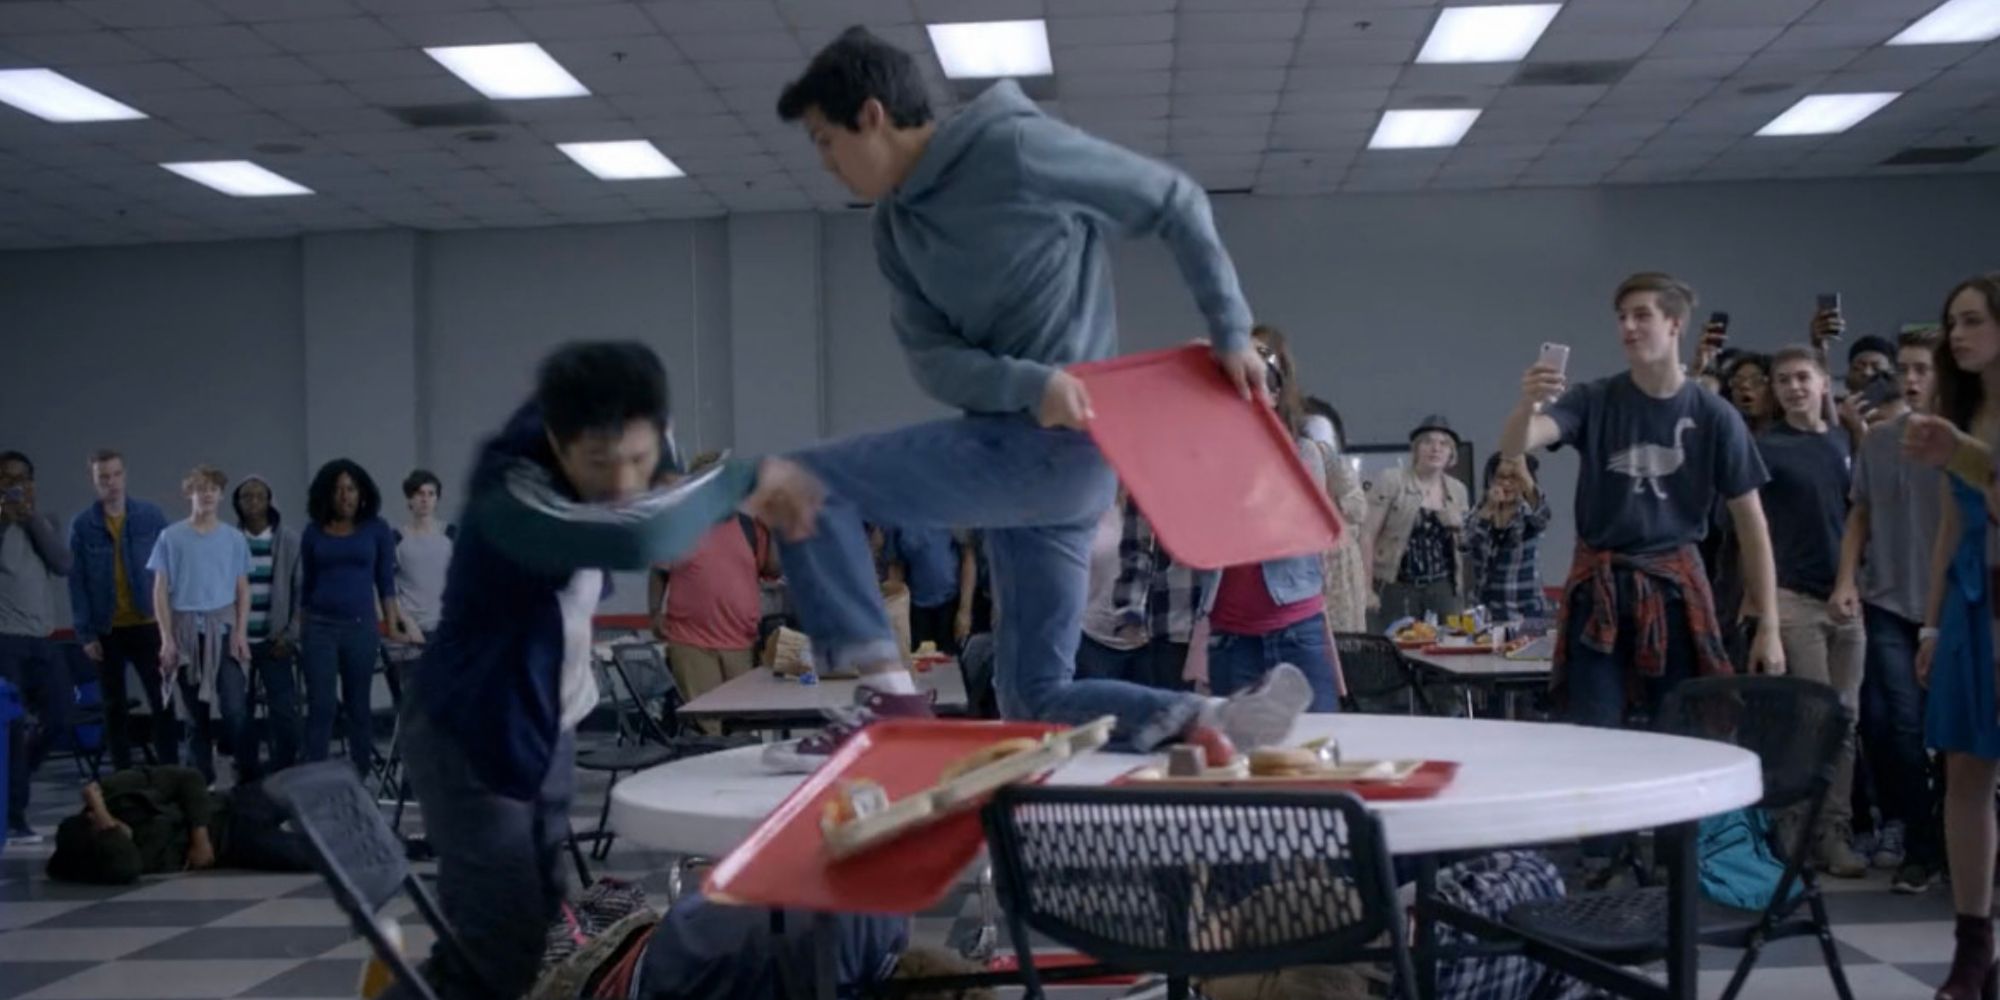 Cobra Kai's Miguel Diaz defeats his bully in a fight using a lunch tray